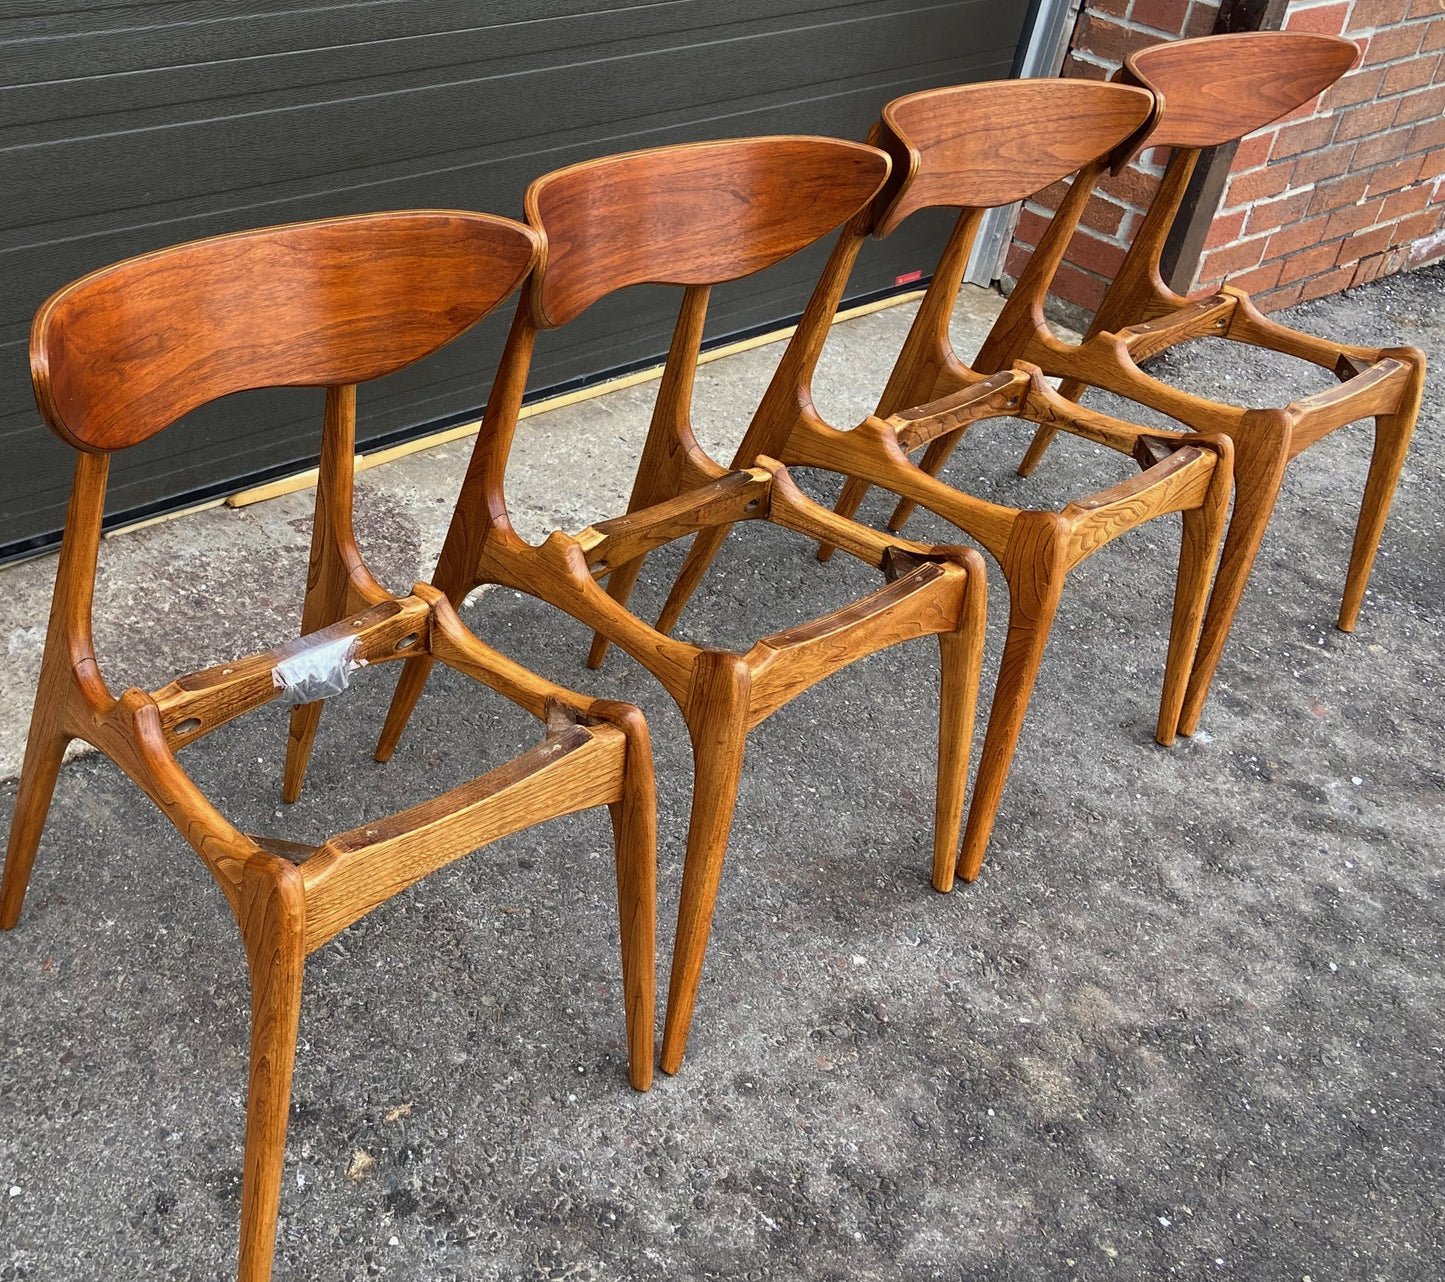 8 REFINISHED REUPHOLSTERED Mid Century Modern Walnut & Ash Chairs by Deilcraft